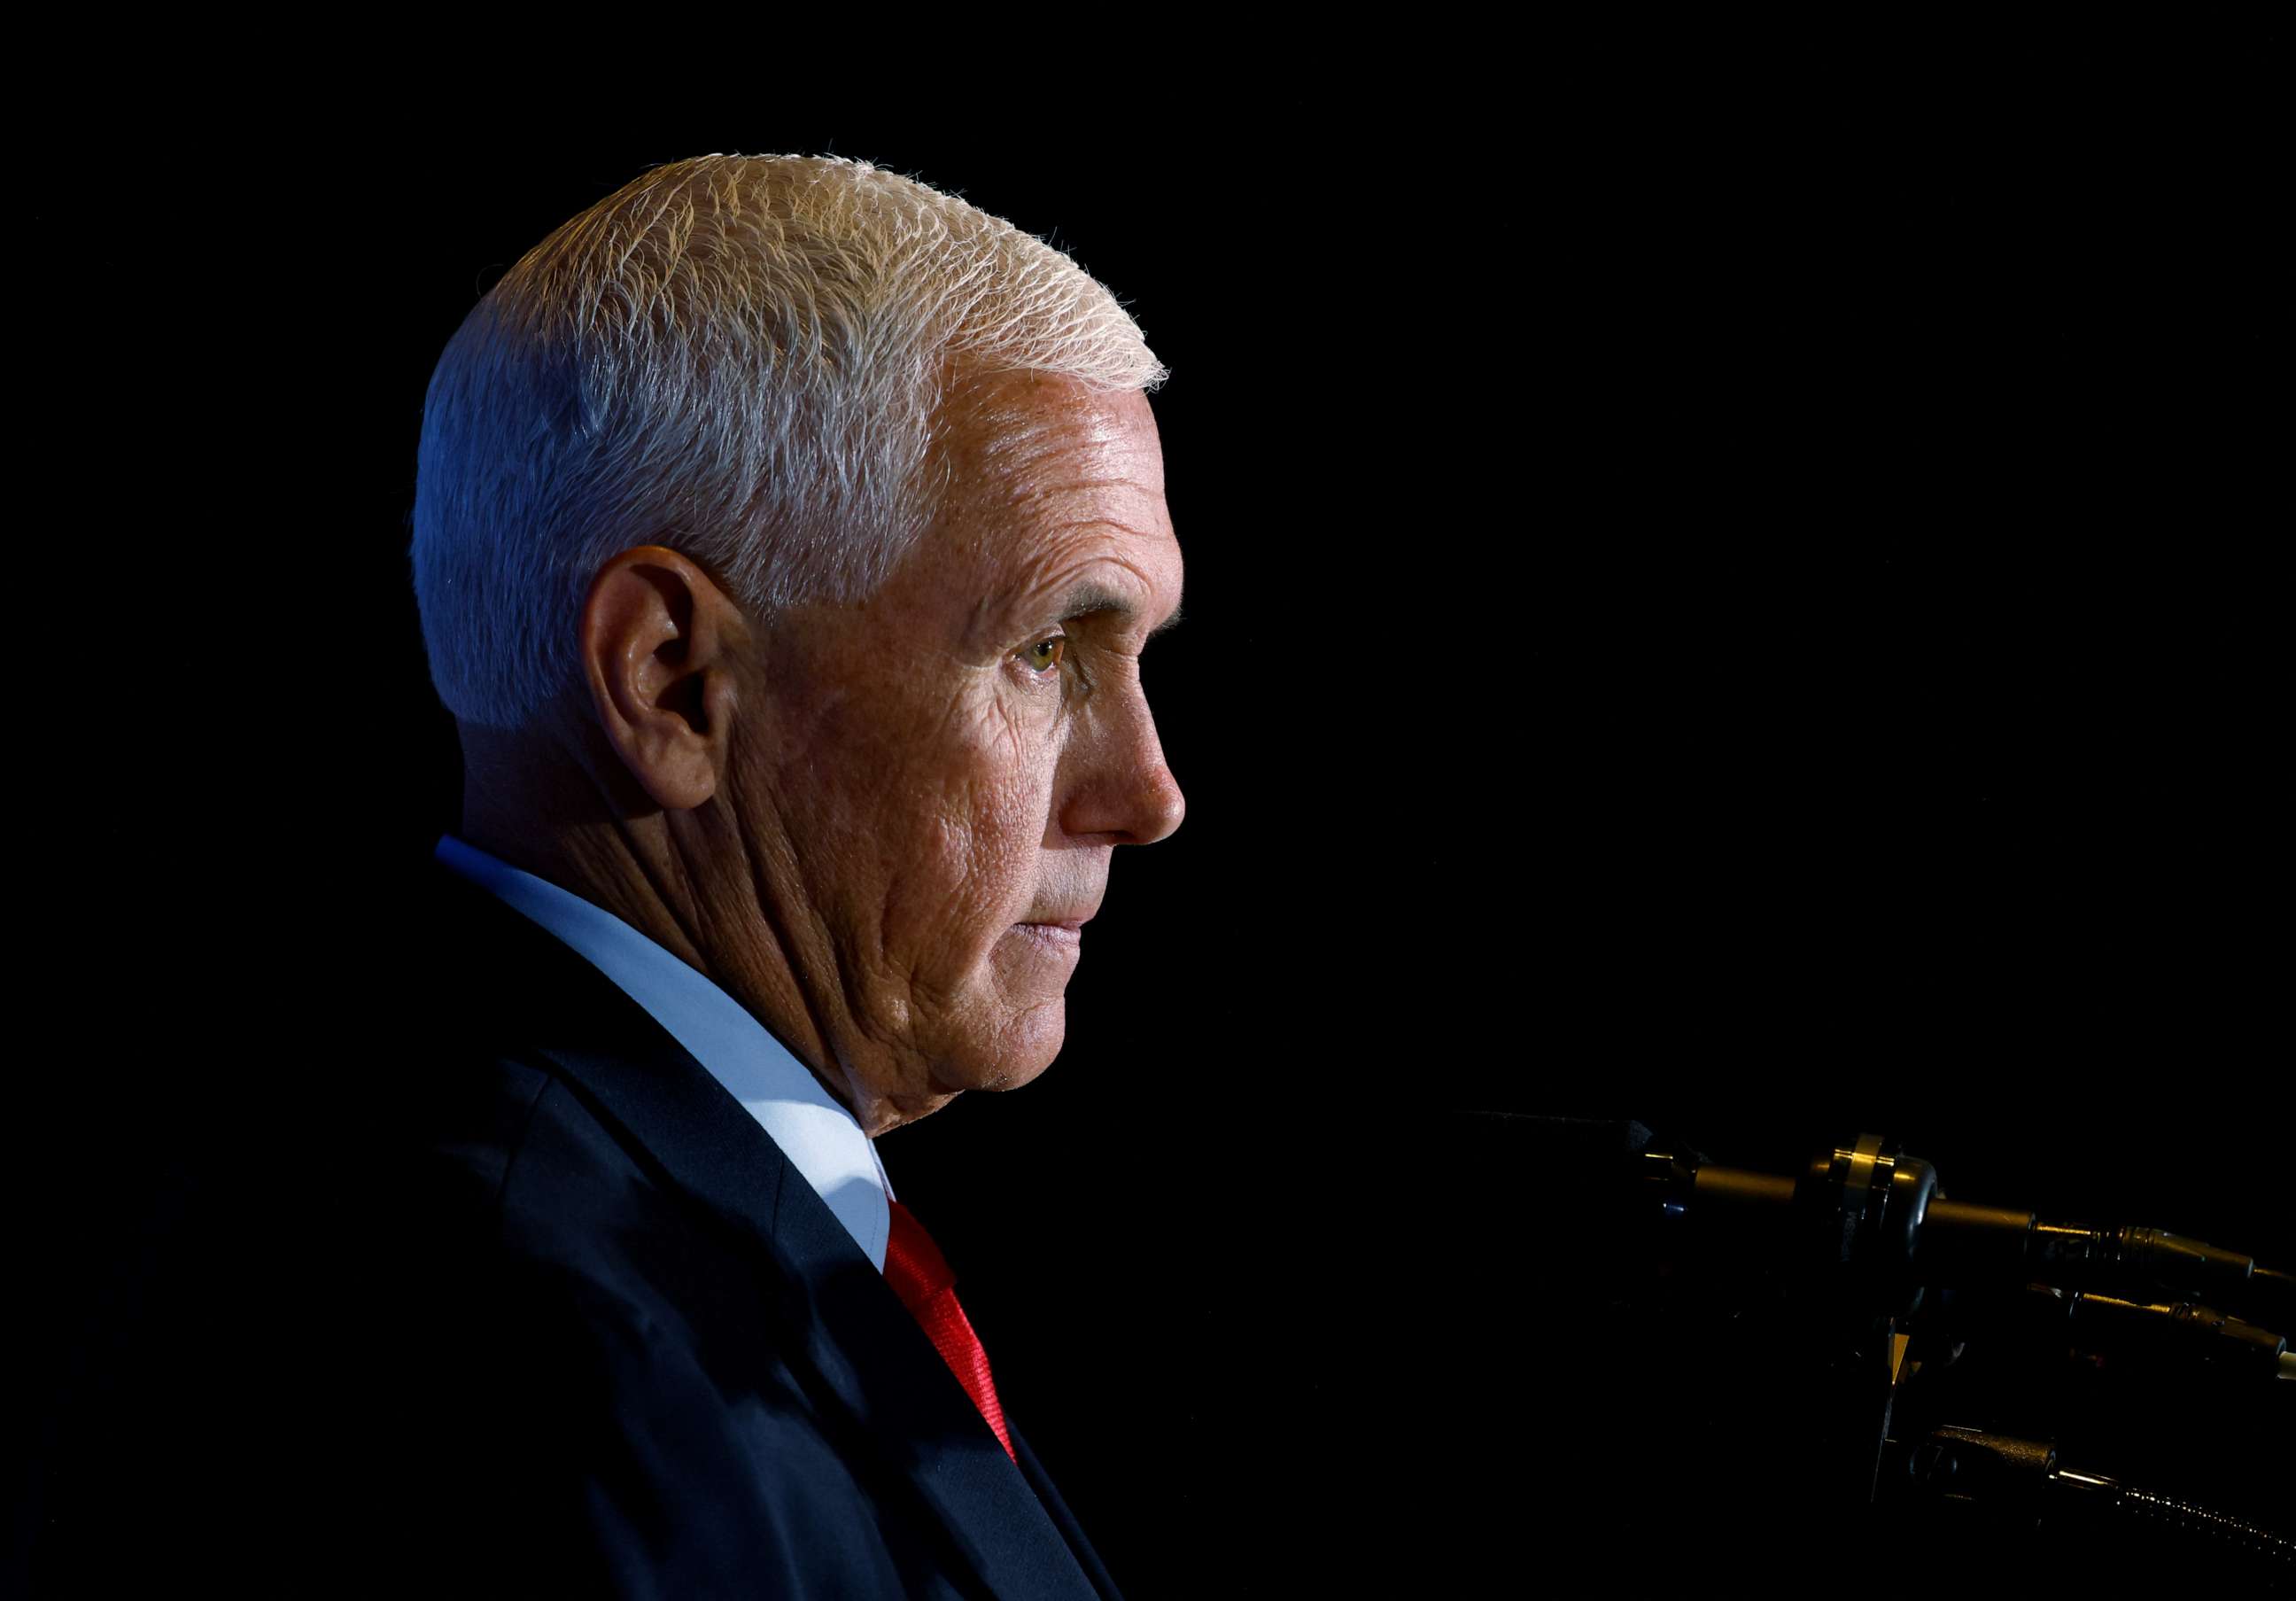 PHOTO: Former U.S. Vice President and Republican presidential candidate Mike Pence attends the North Carolina Republican Party convention in Greensboro, North Carolina, June 10, 2023.